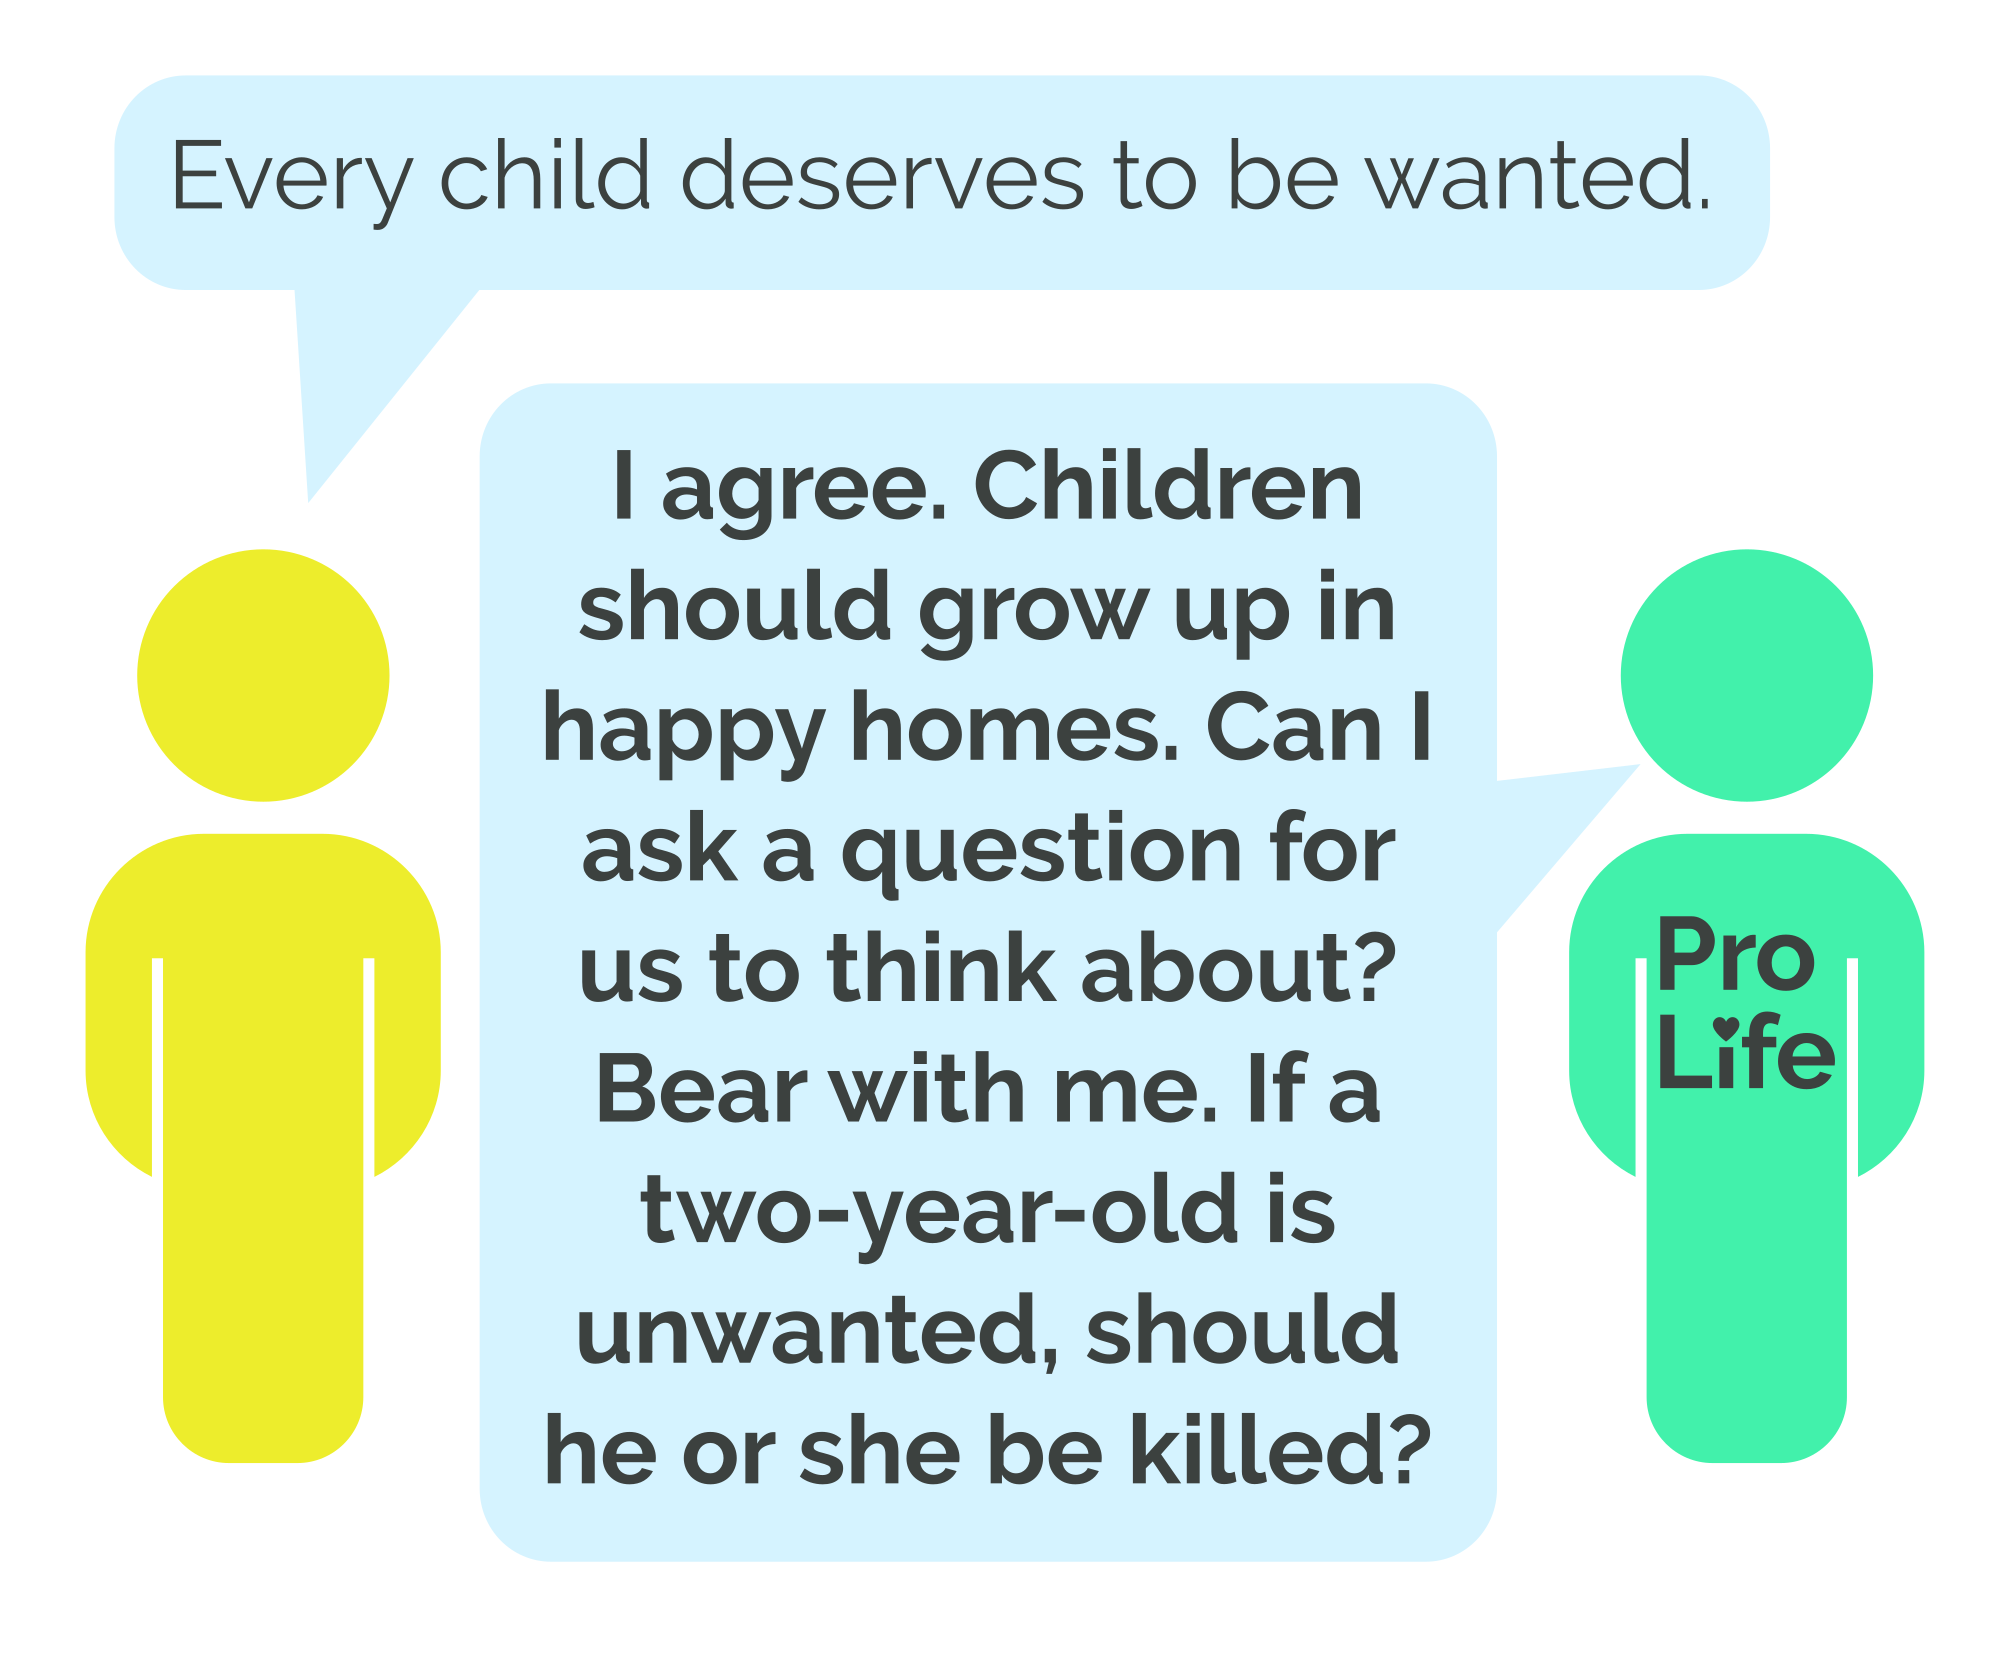 Person 1: Every child deserves to be wanted. Person 2 (our hero): I agree. Children should grow up in happy homes. Can I ask a question for us to think about? Bear with me. If a two-year-old is unwanted, should he or she be killed?